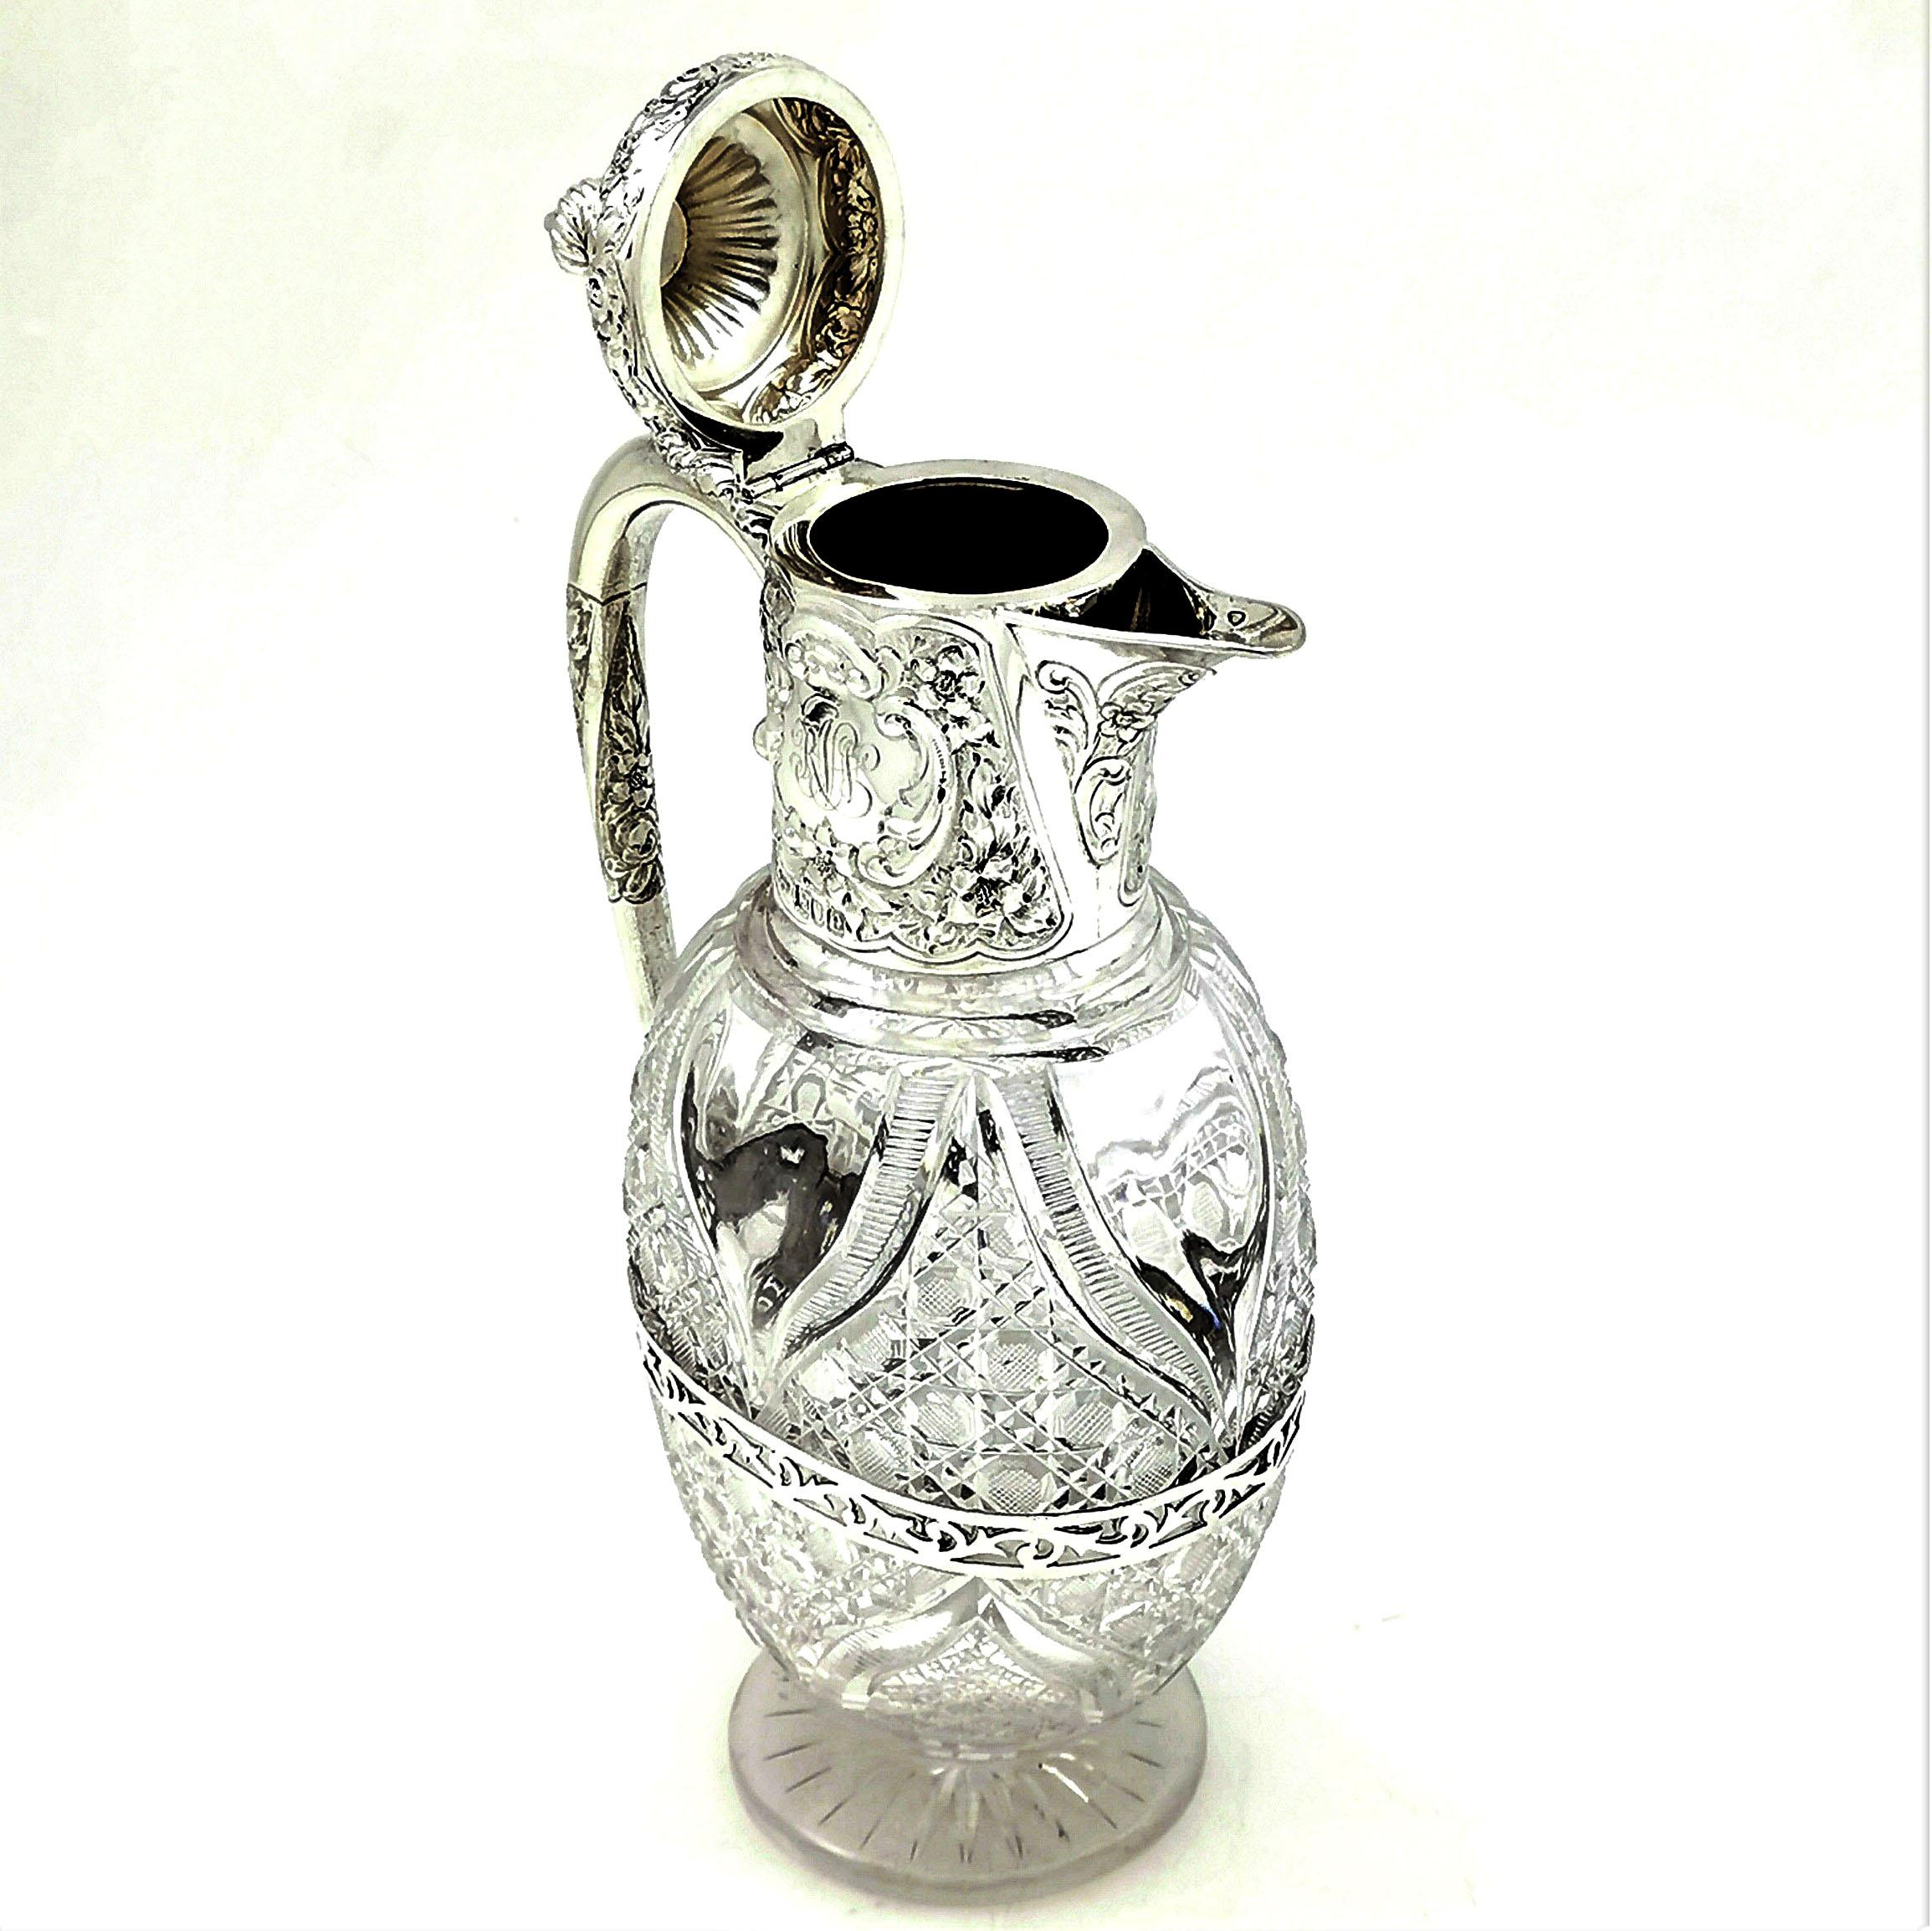 English Antique Victorian Silver and Cut Glass Claret Jug / Wine Decanter Ewer, 1900